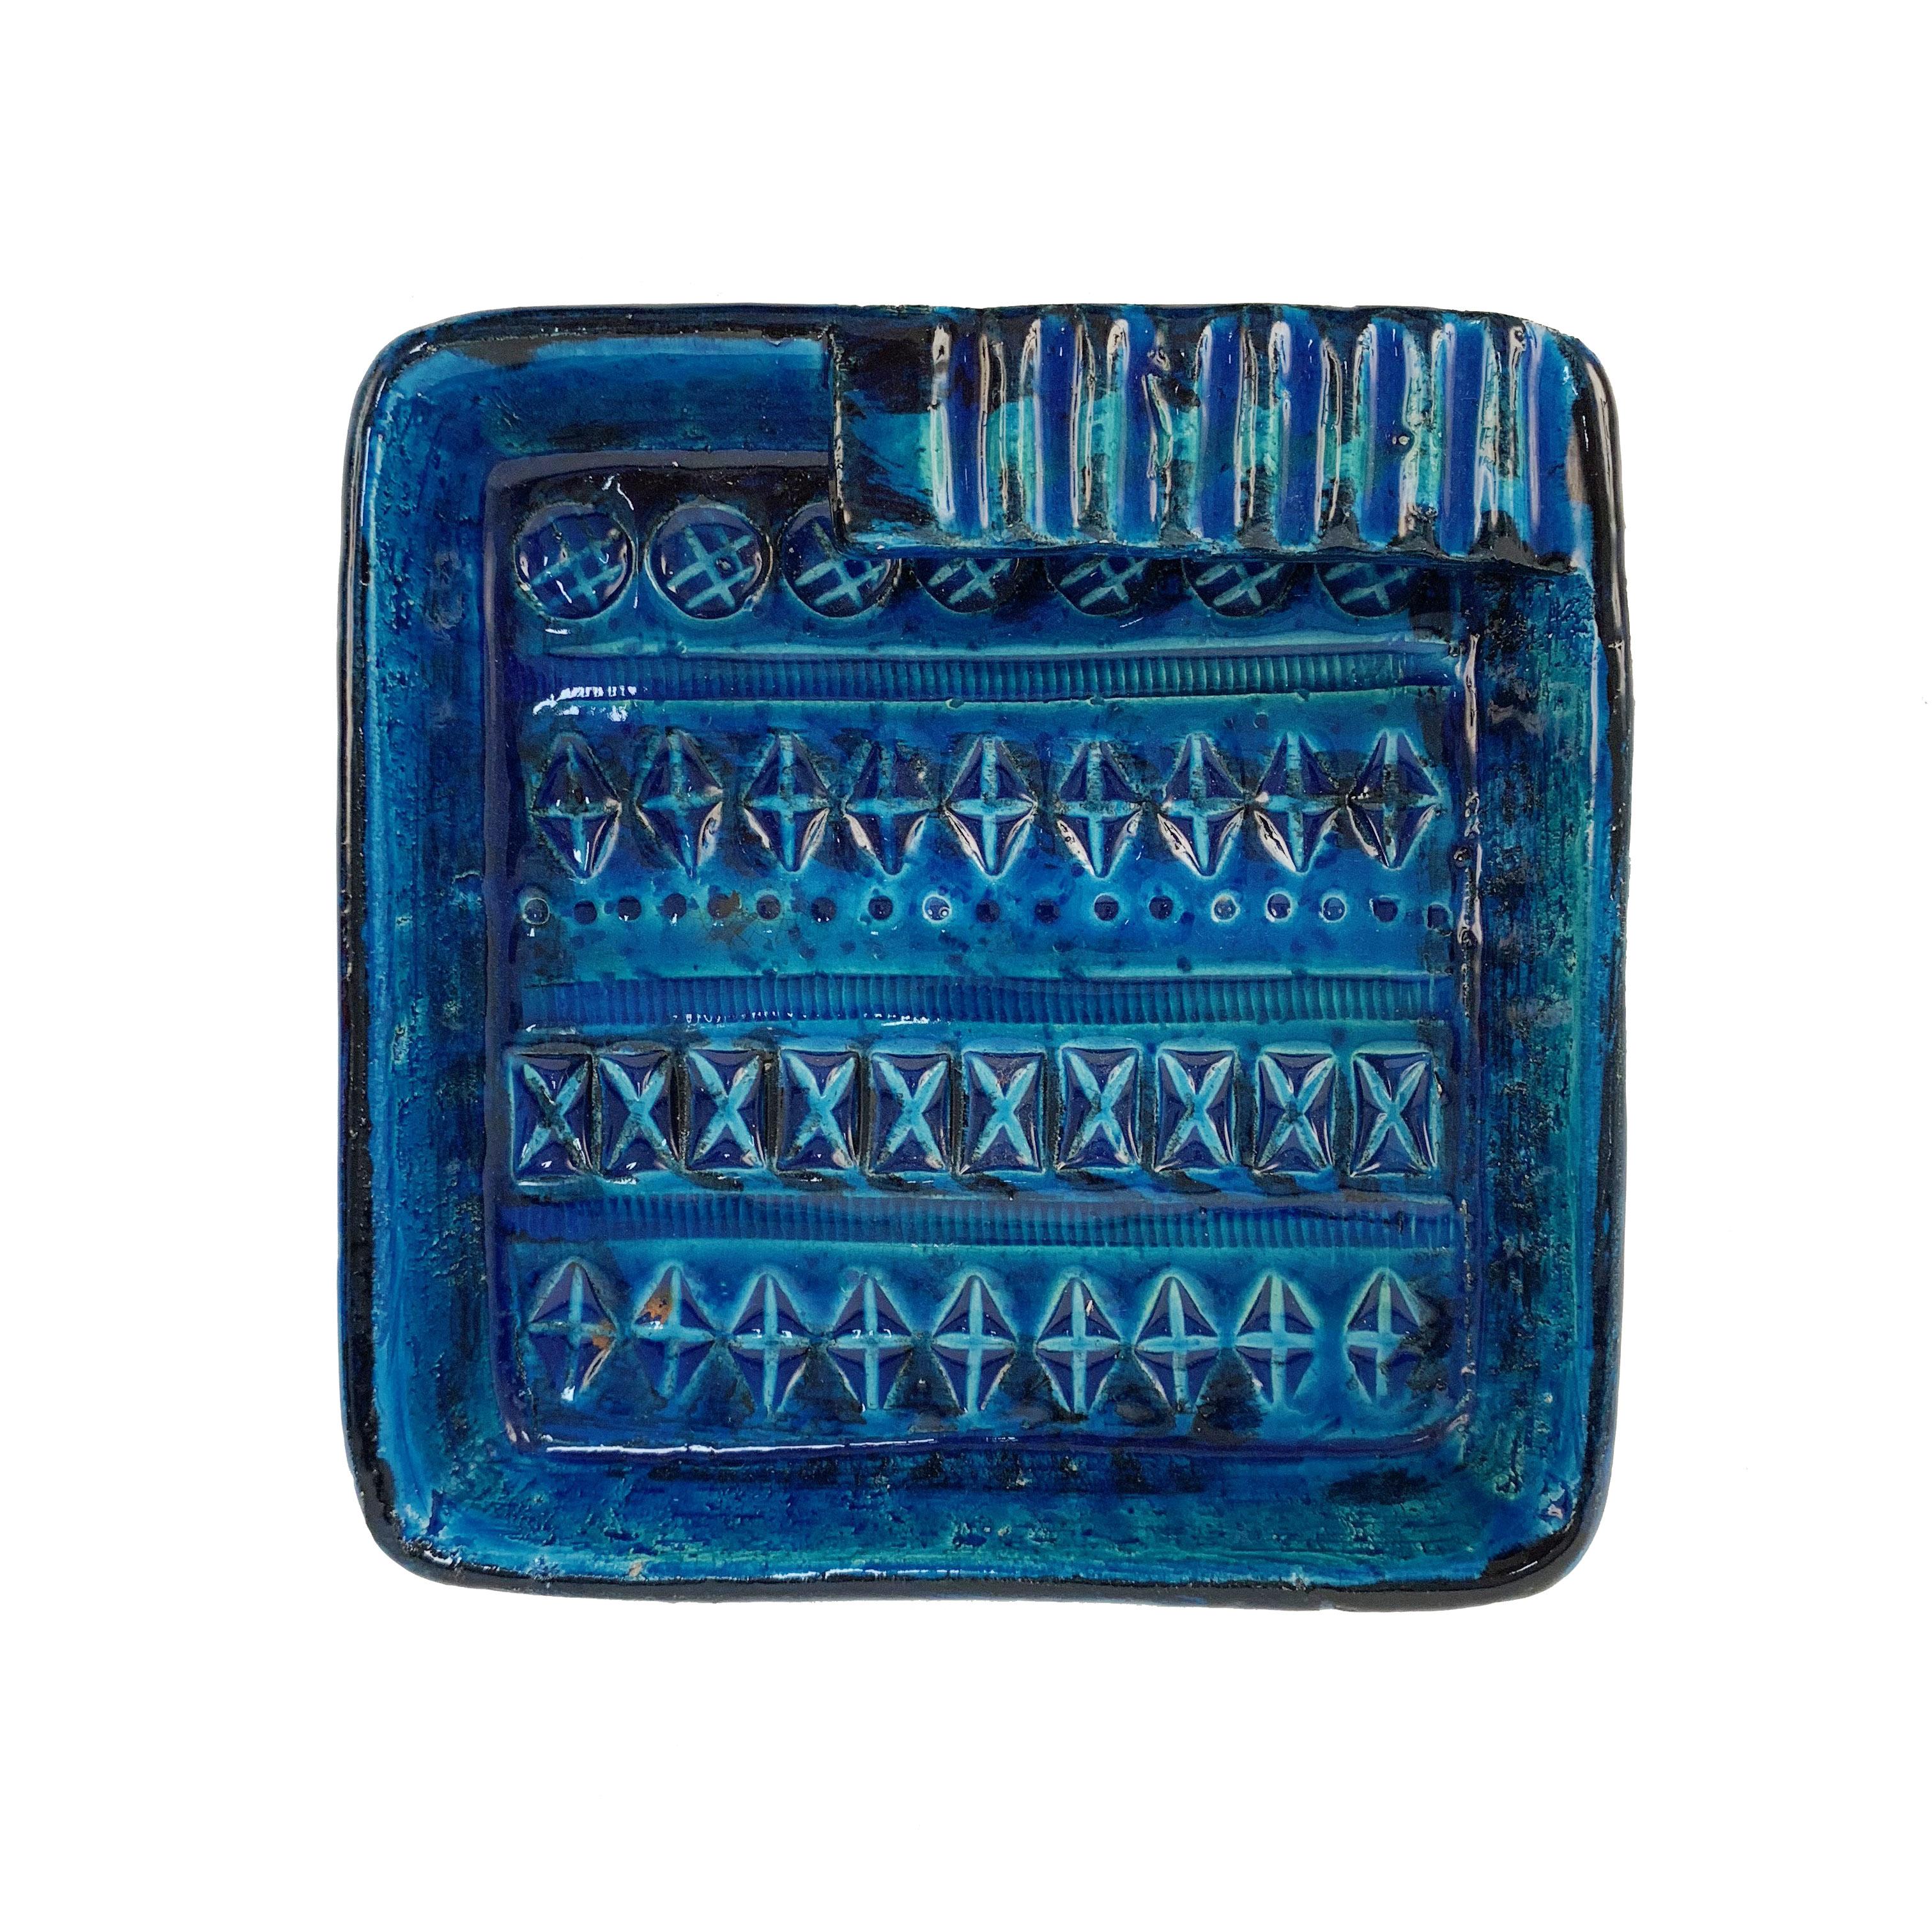 Beautiful blue glazed (Rimini Blu) round ceramic ashtray design by Aldo Londi and manufactured by Bitossi. Handcrafted in Italy with hand-carved geometric design and in a glazed vibrant turquoise and cobalt blue, Italy, 1960s.